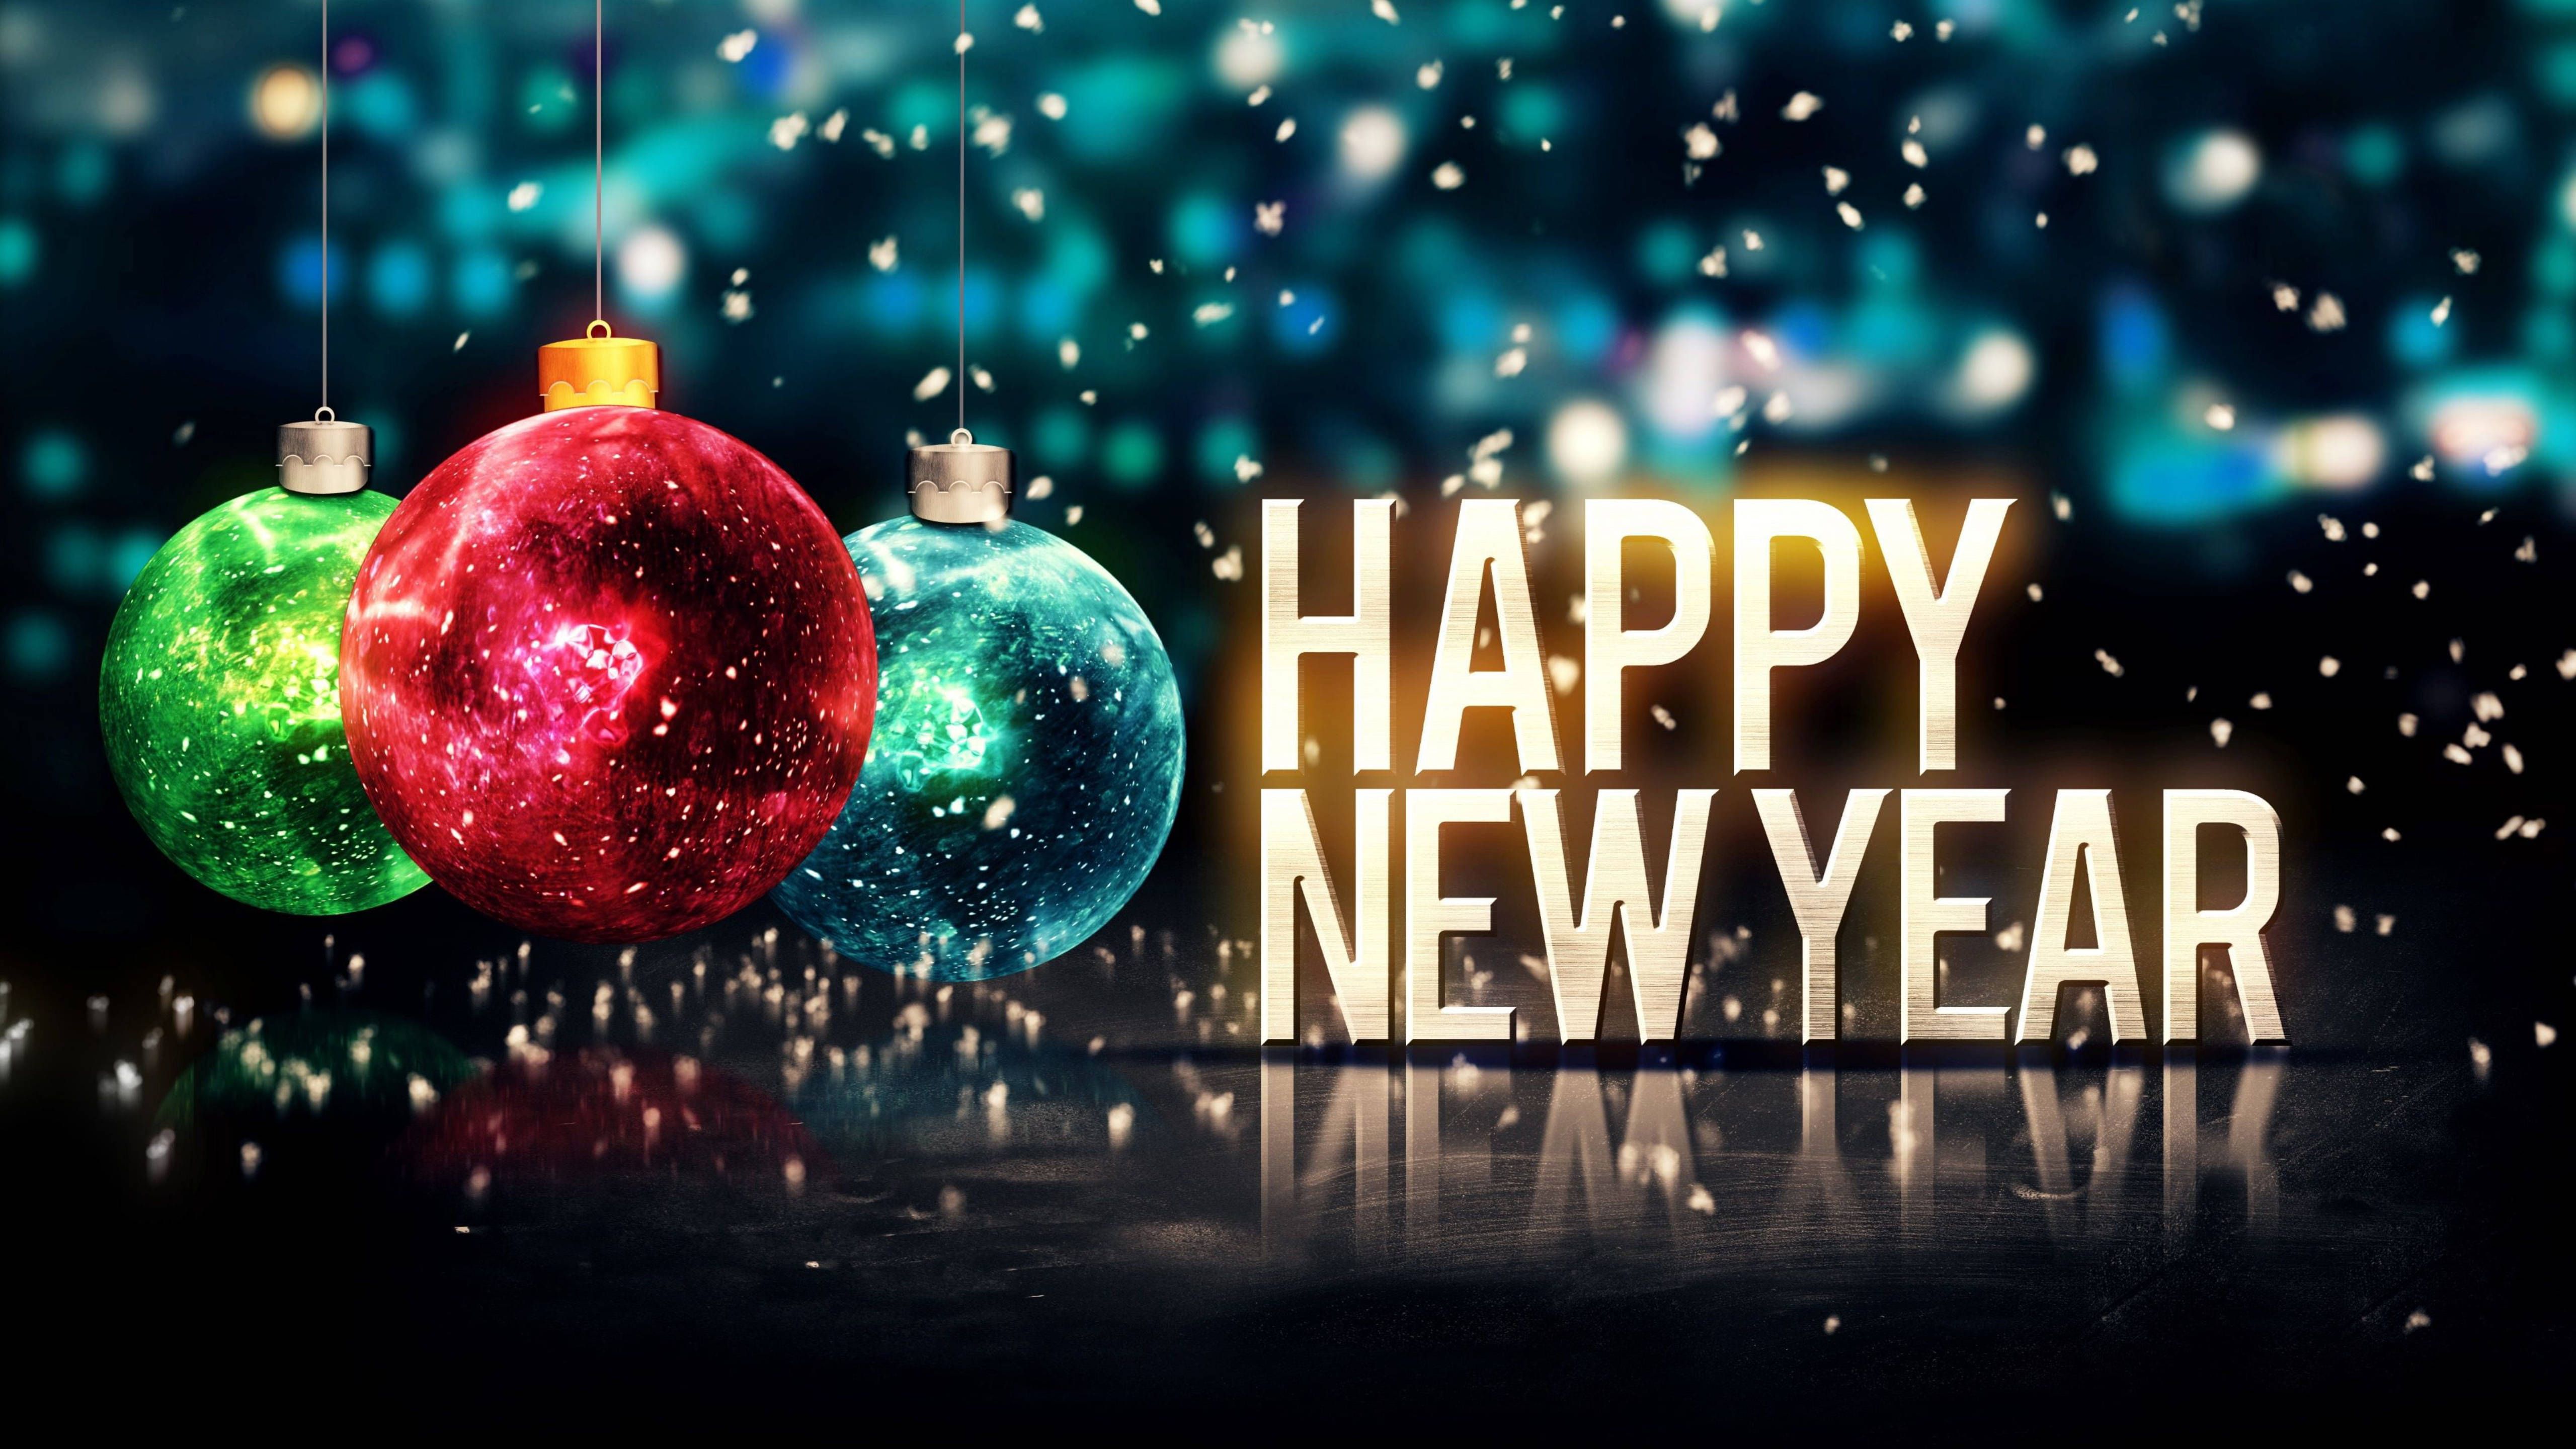 Download New Year's Aesthetic Greeting Balls Wallpaper